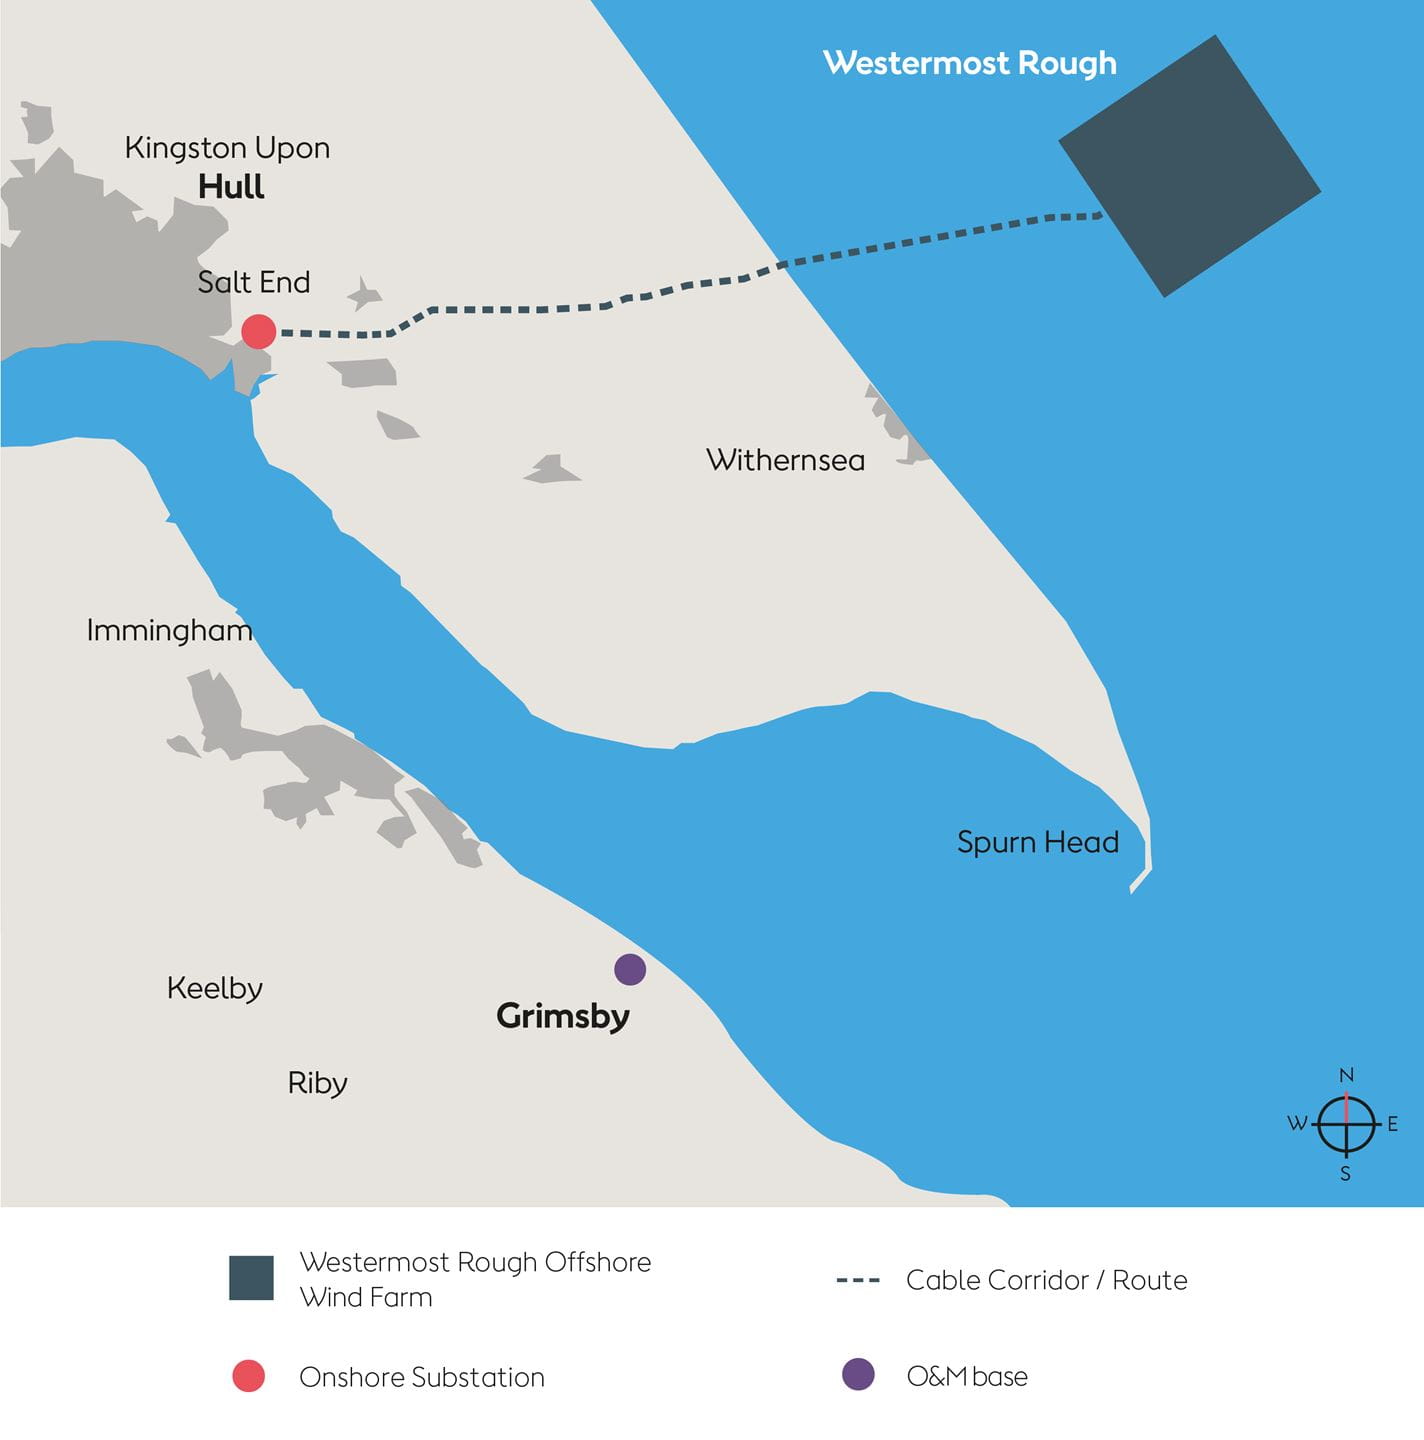 Map showing the location of Westermost Rough Offshore Wind Farm.